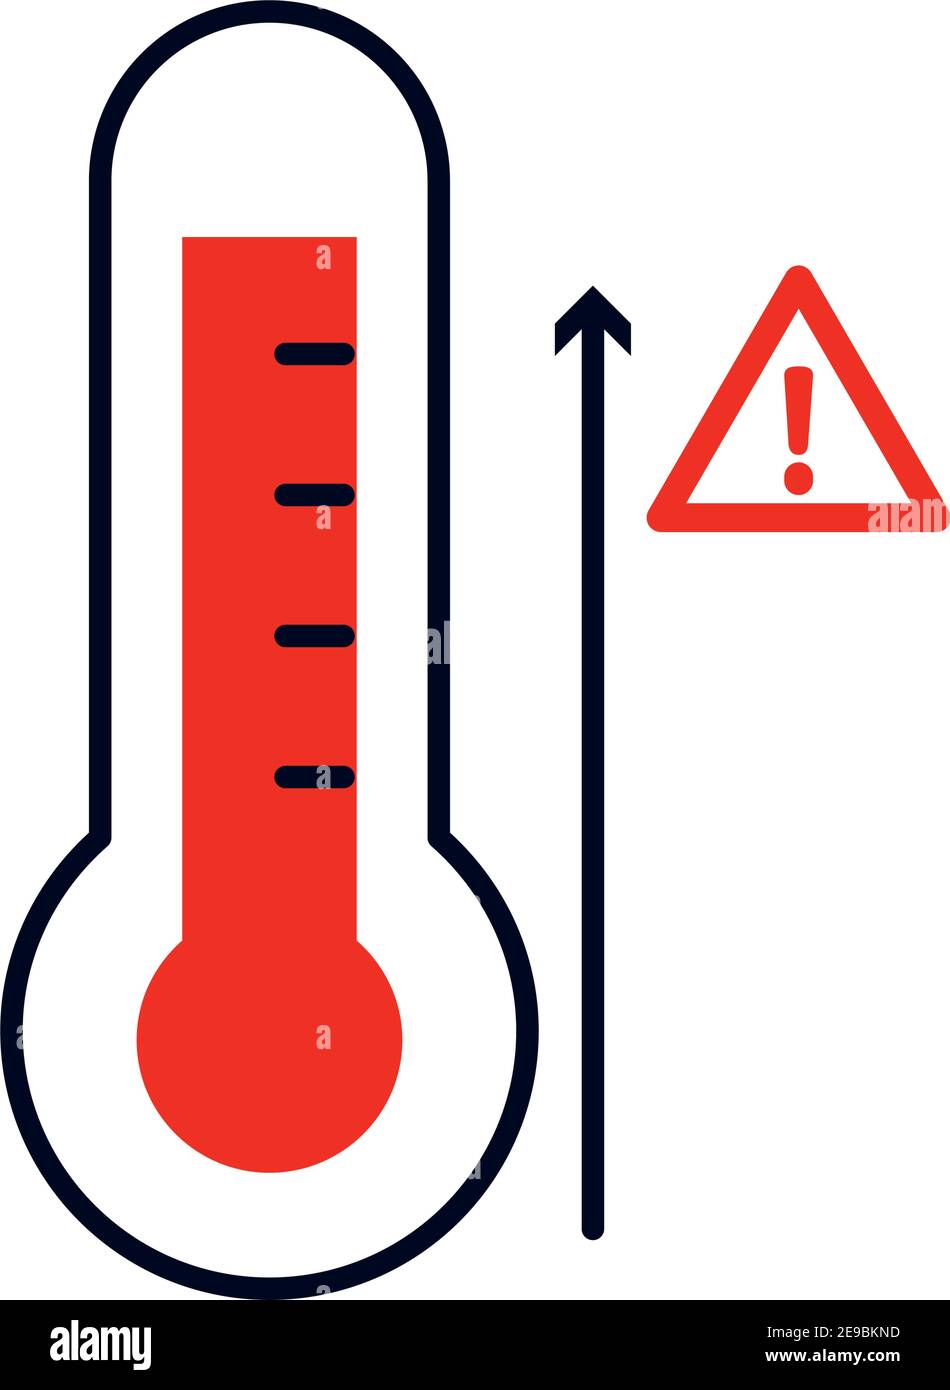 https://c8.alamy.com/comp/2E9BKND/thermometer-with-high-temperature-over-white-background-colorful-design-vector-illustration-2E9BKND.jpg